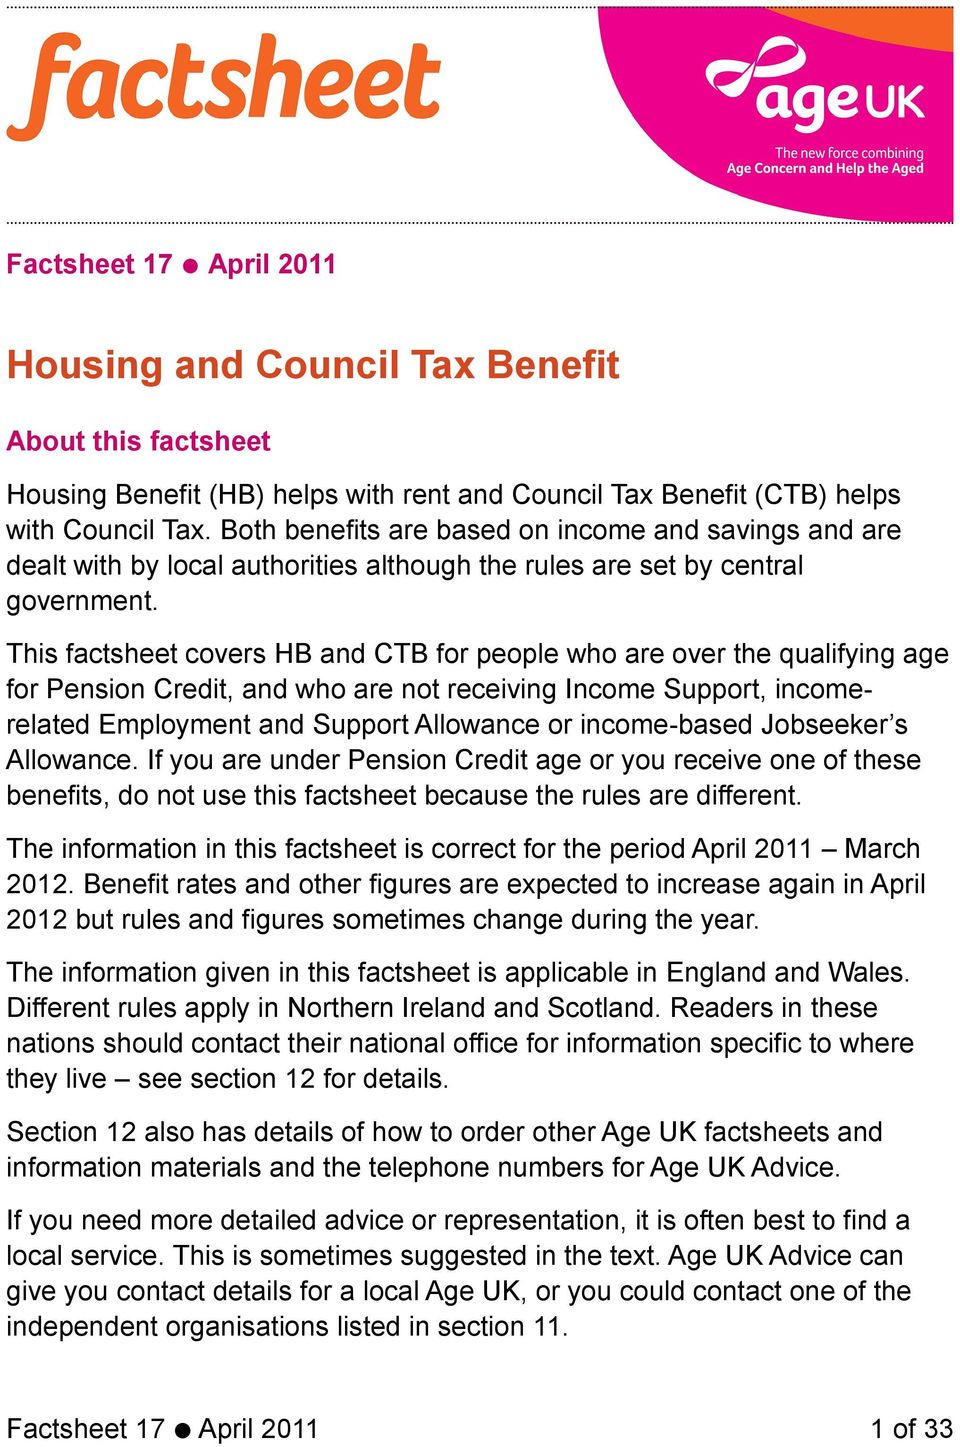 This factsheet covers HB and CTB for people who are over the qualifying age for Pension Credit, and who are not receiving Income Support, incomerelated Employment and Support Allowance or